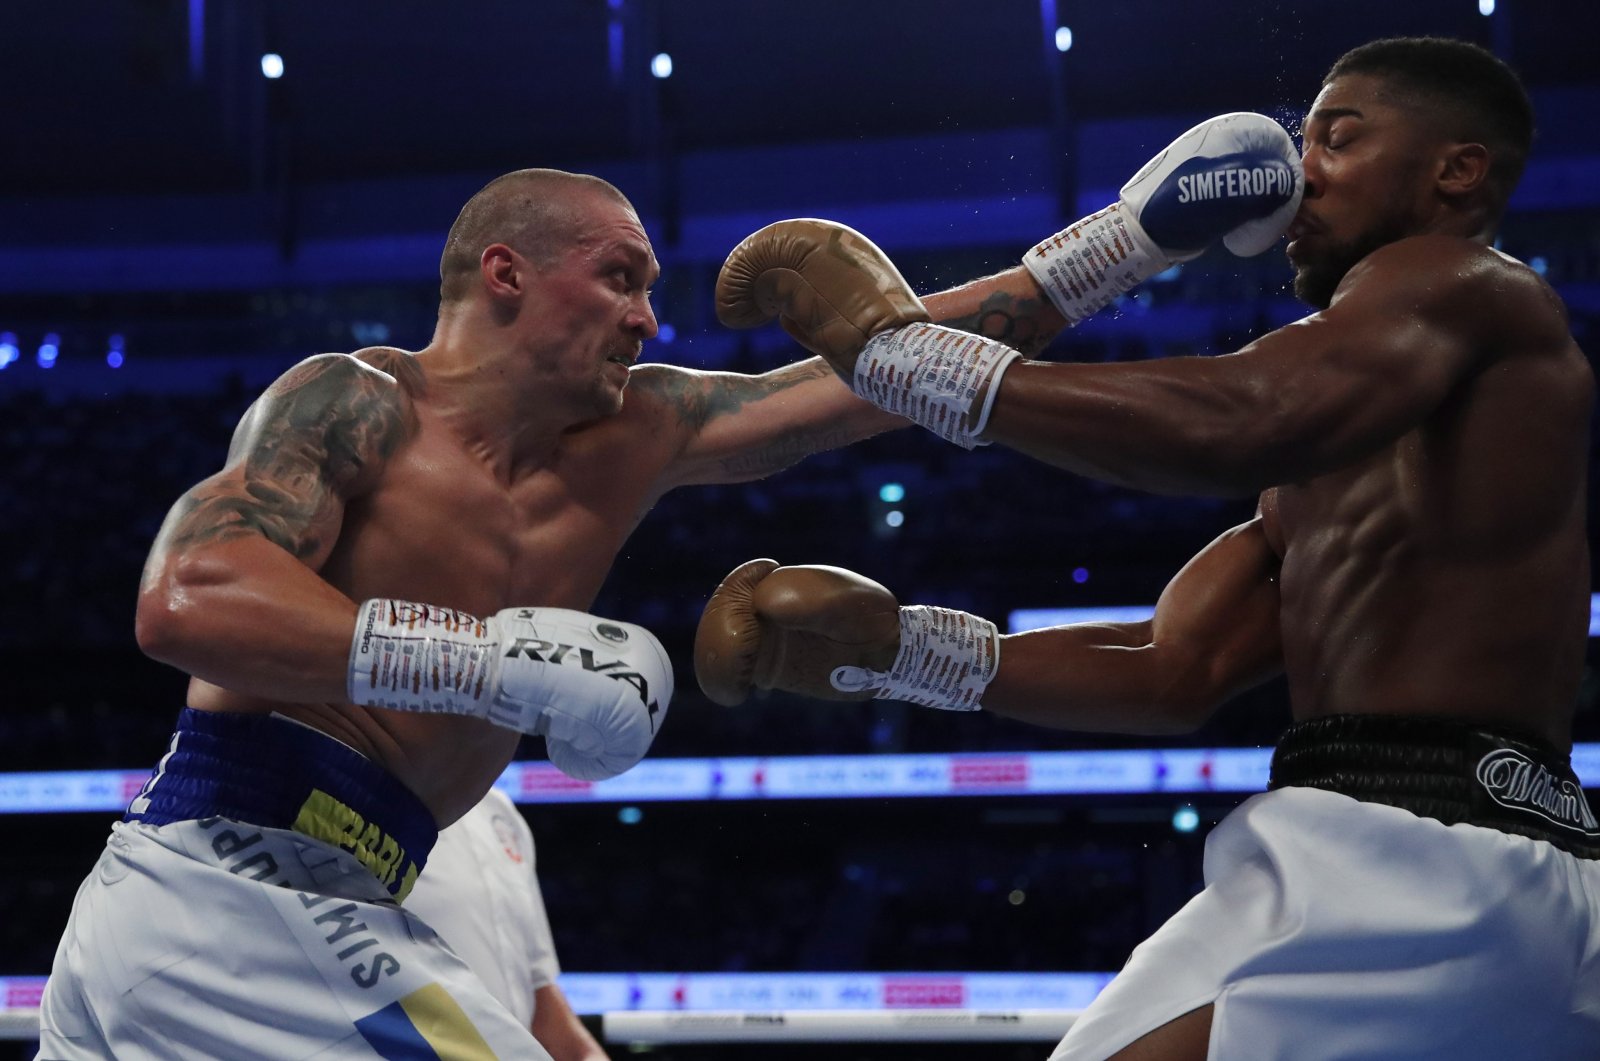 Ukraine's Oleksandr Usyk (L) in action against Britain's Anthony Joshua during their WBA, IBF & WBO heavyweight titles bout at Tottenham Hotspur Stadium, London, England, Sept. 25, 2021. (Reuters Photo)